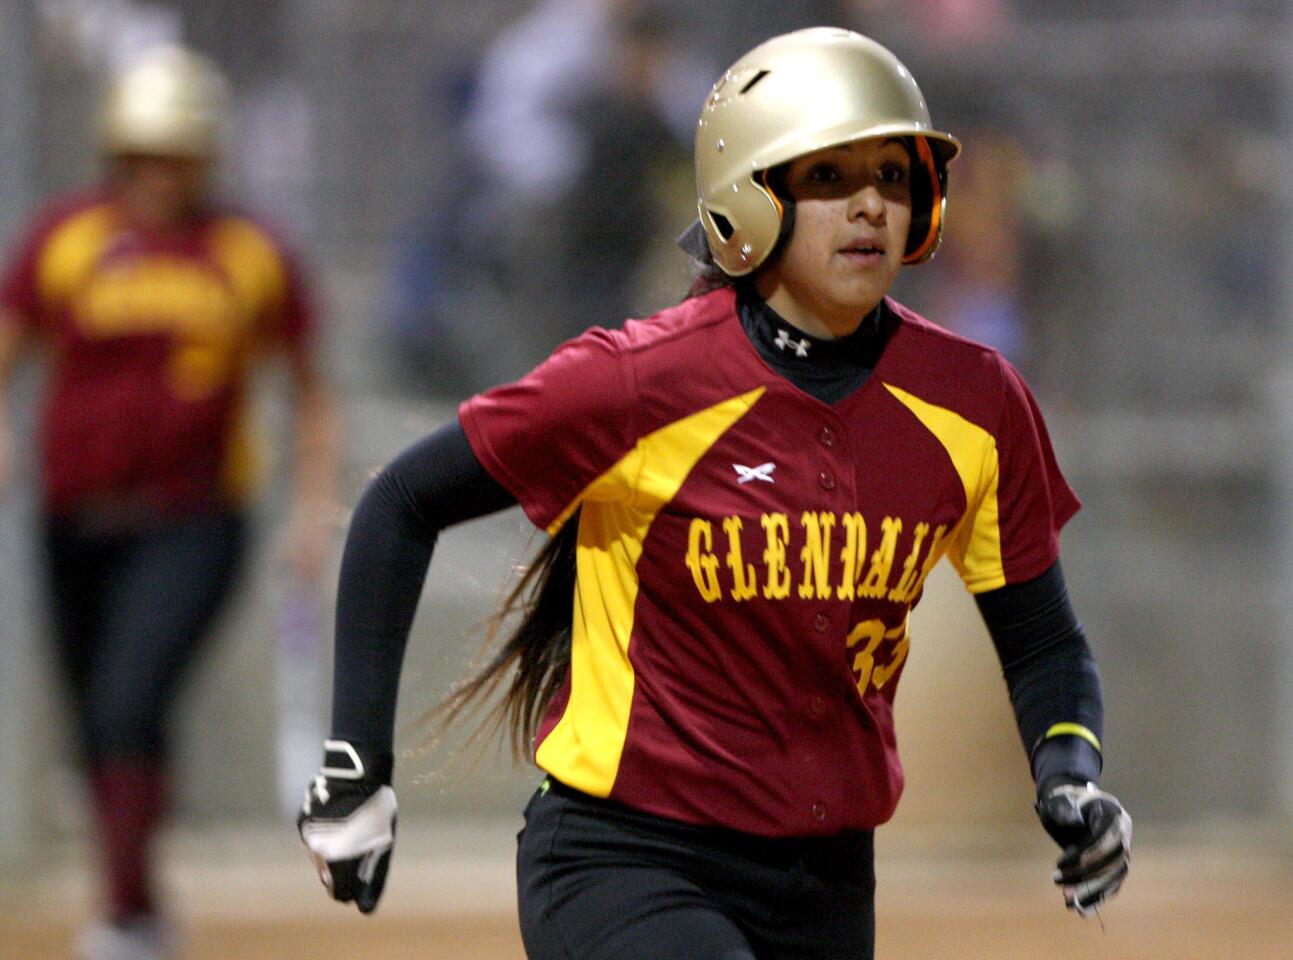 Glendale Community College softball player #33 Bryanna Brito makes it to first base on four balls in a game vs. Santiago Canyon College during the Dave "Hawk" Wilder 11th Annual Softball Tournament 2016 at Glendale Sports Complex in Glendale, on Saturday, Jan. 30, 2016.